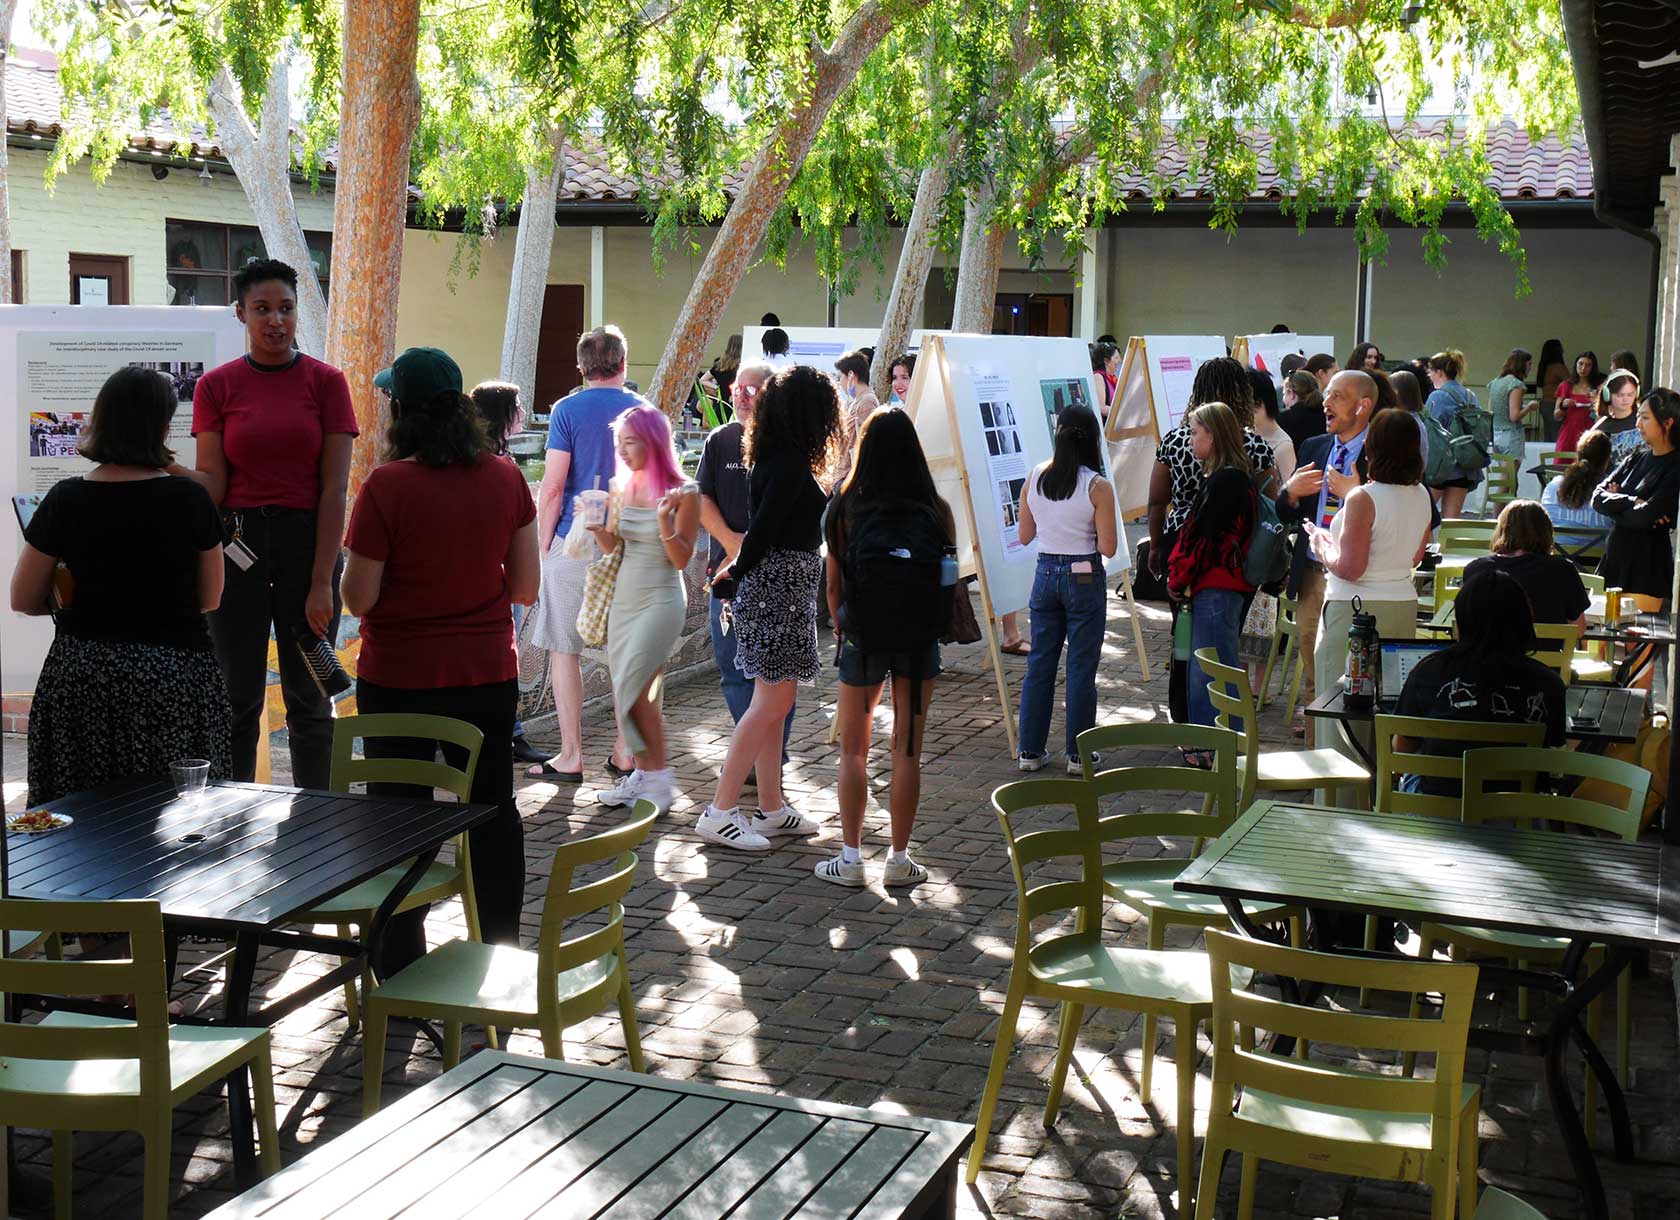 The Scripps community participates in the annual Summer Research Tea